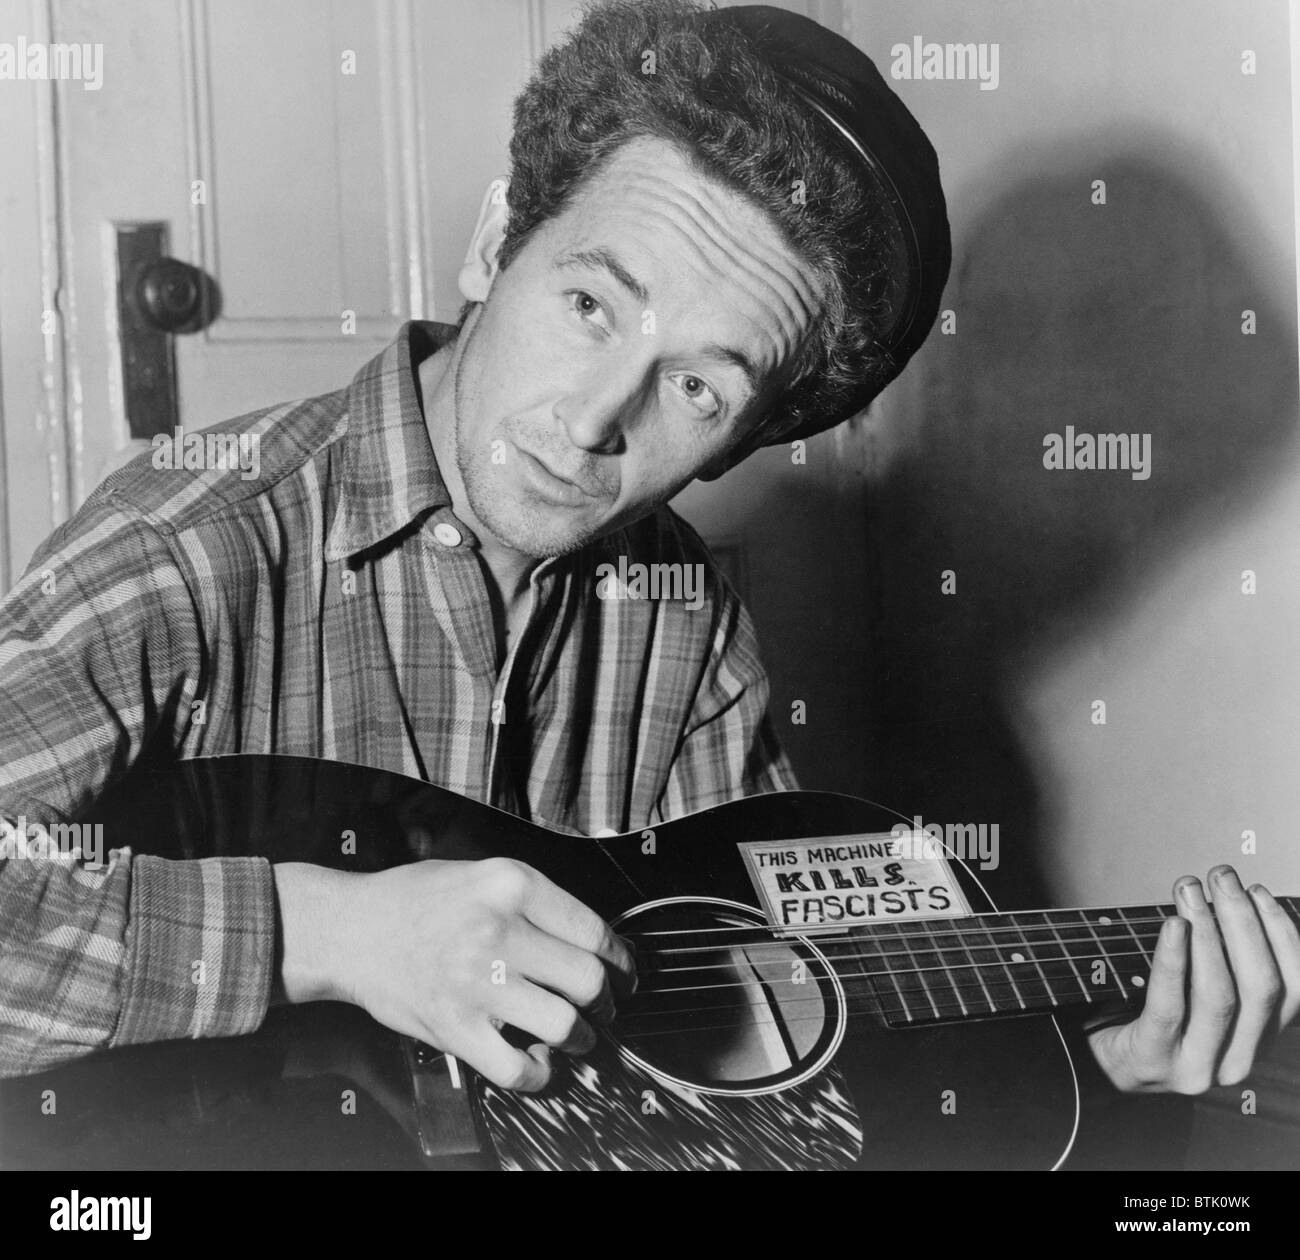 Woody Guthrie (1912-1967), folk singer playing a guitar that has a sticker attached reading: This Machine Kills Fascists. He wrote over 1,000 songs, many still well known, such as THIS LAND IS YOUR LAND. 1943. Stock Photo